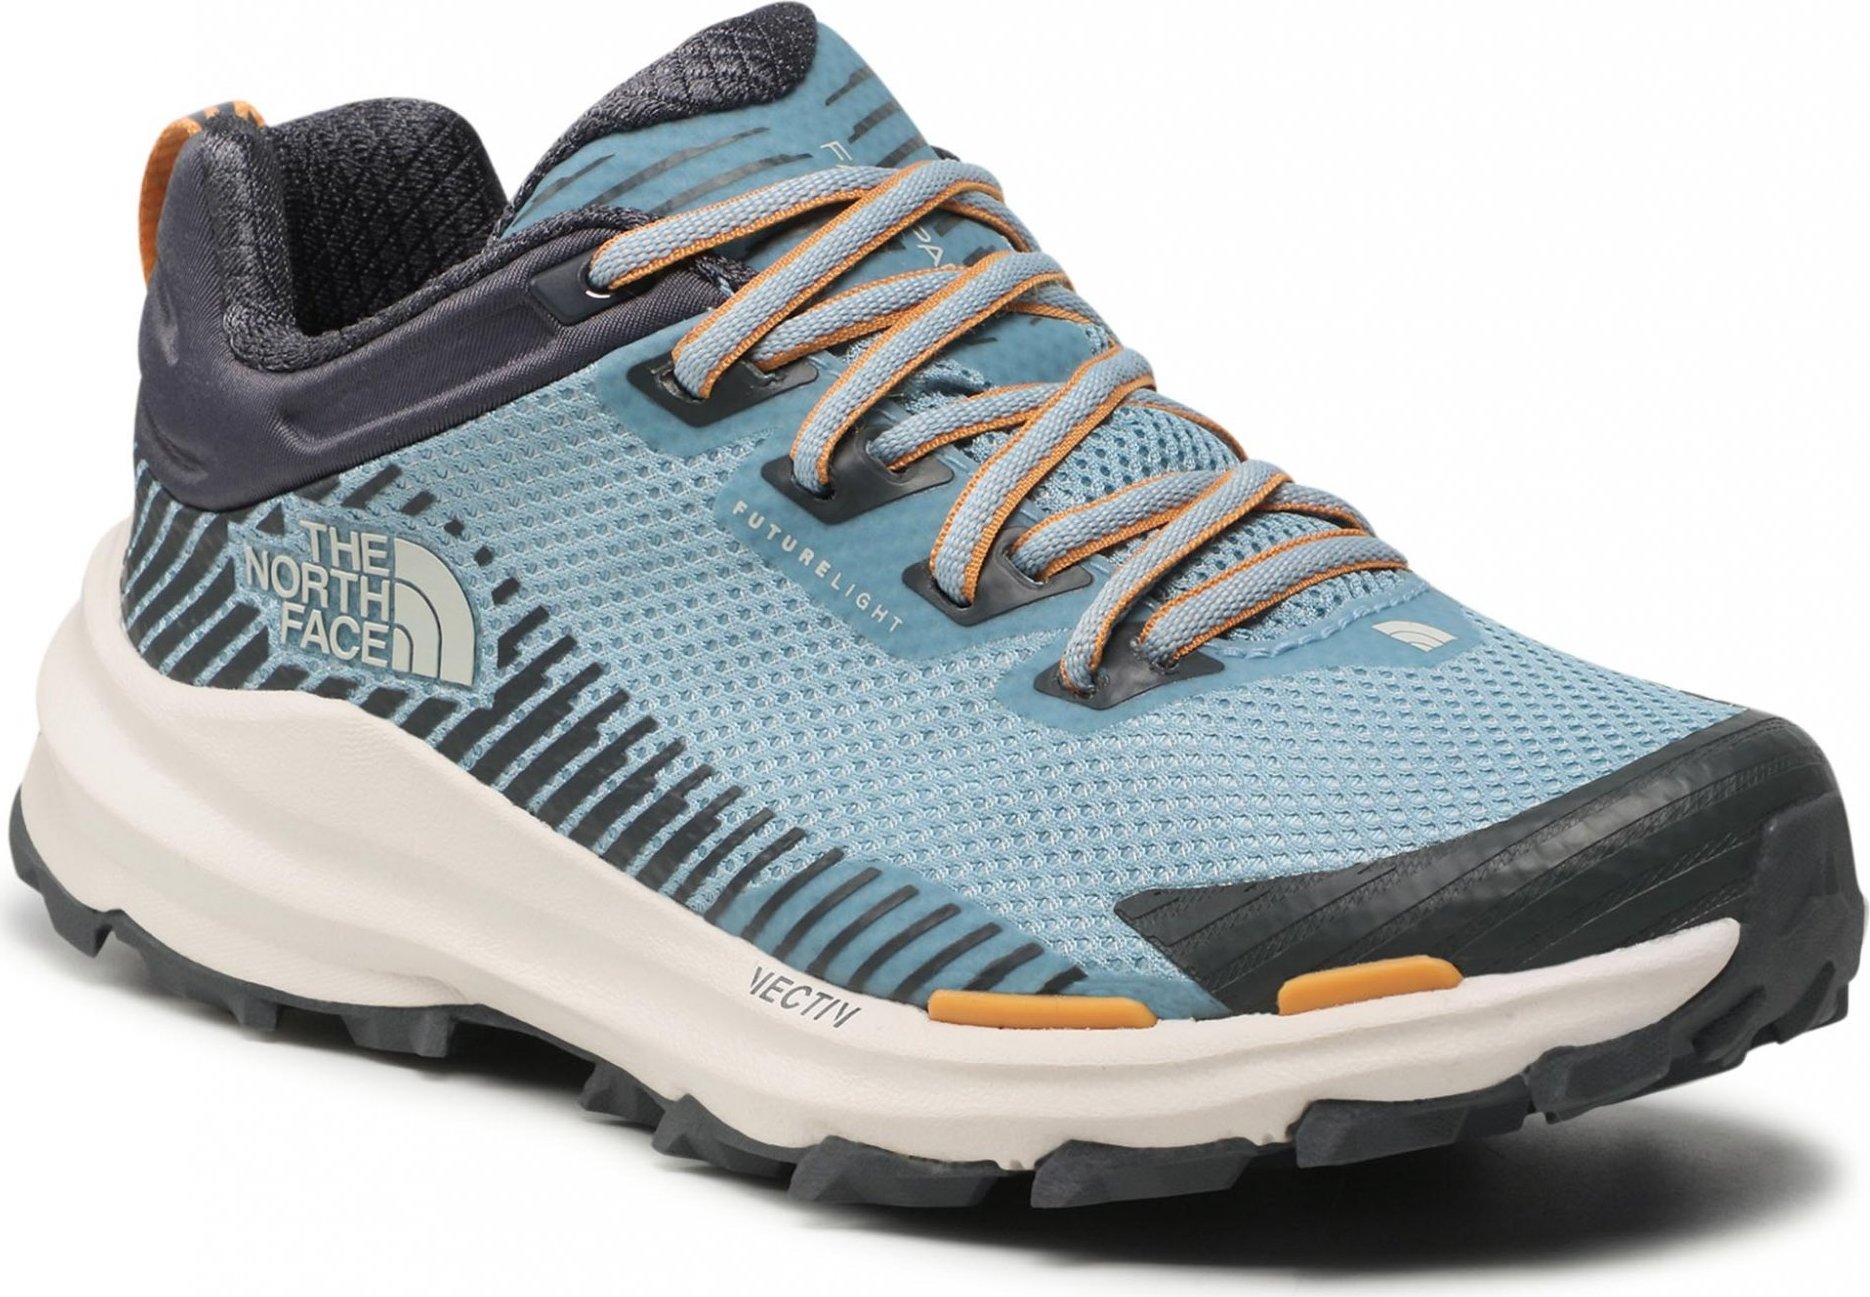 The North Face Women's Vectiv Fastpack Futurelight NF0A5JCZ6431